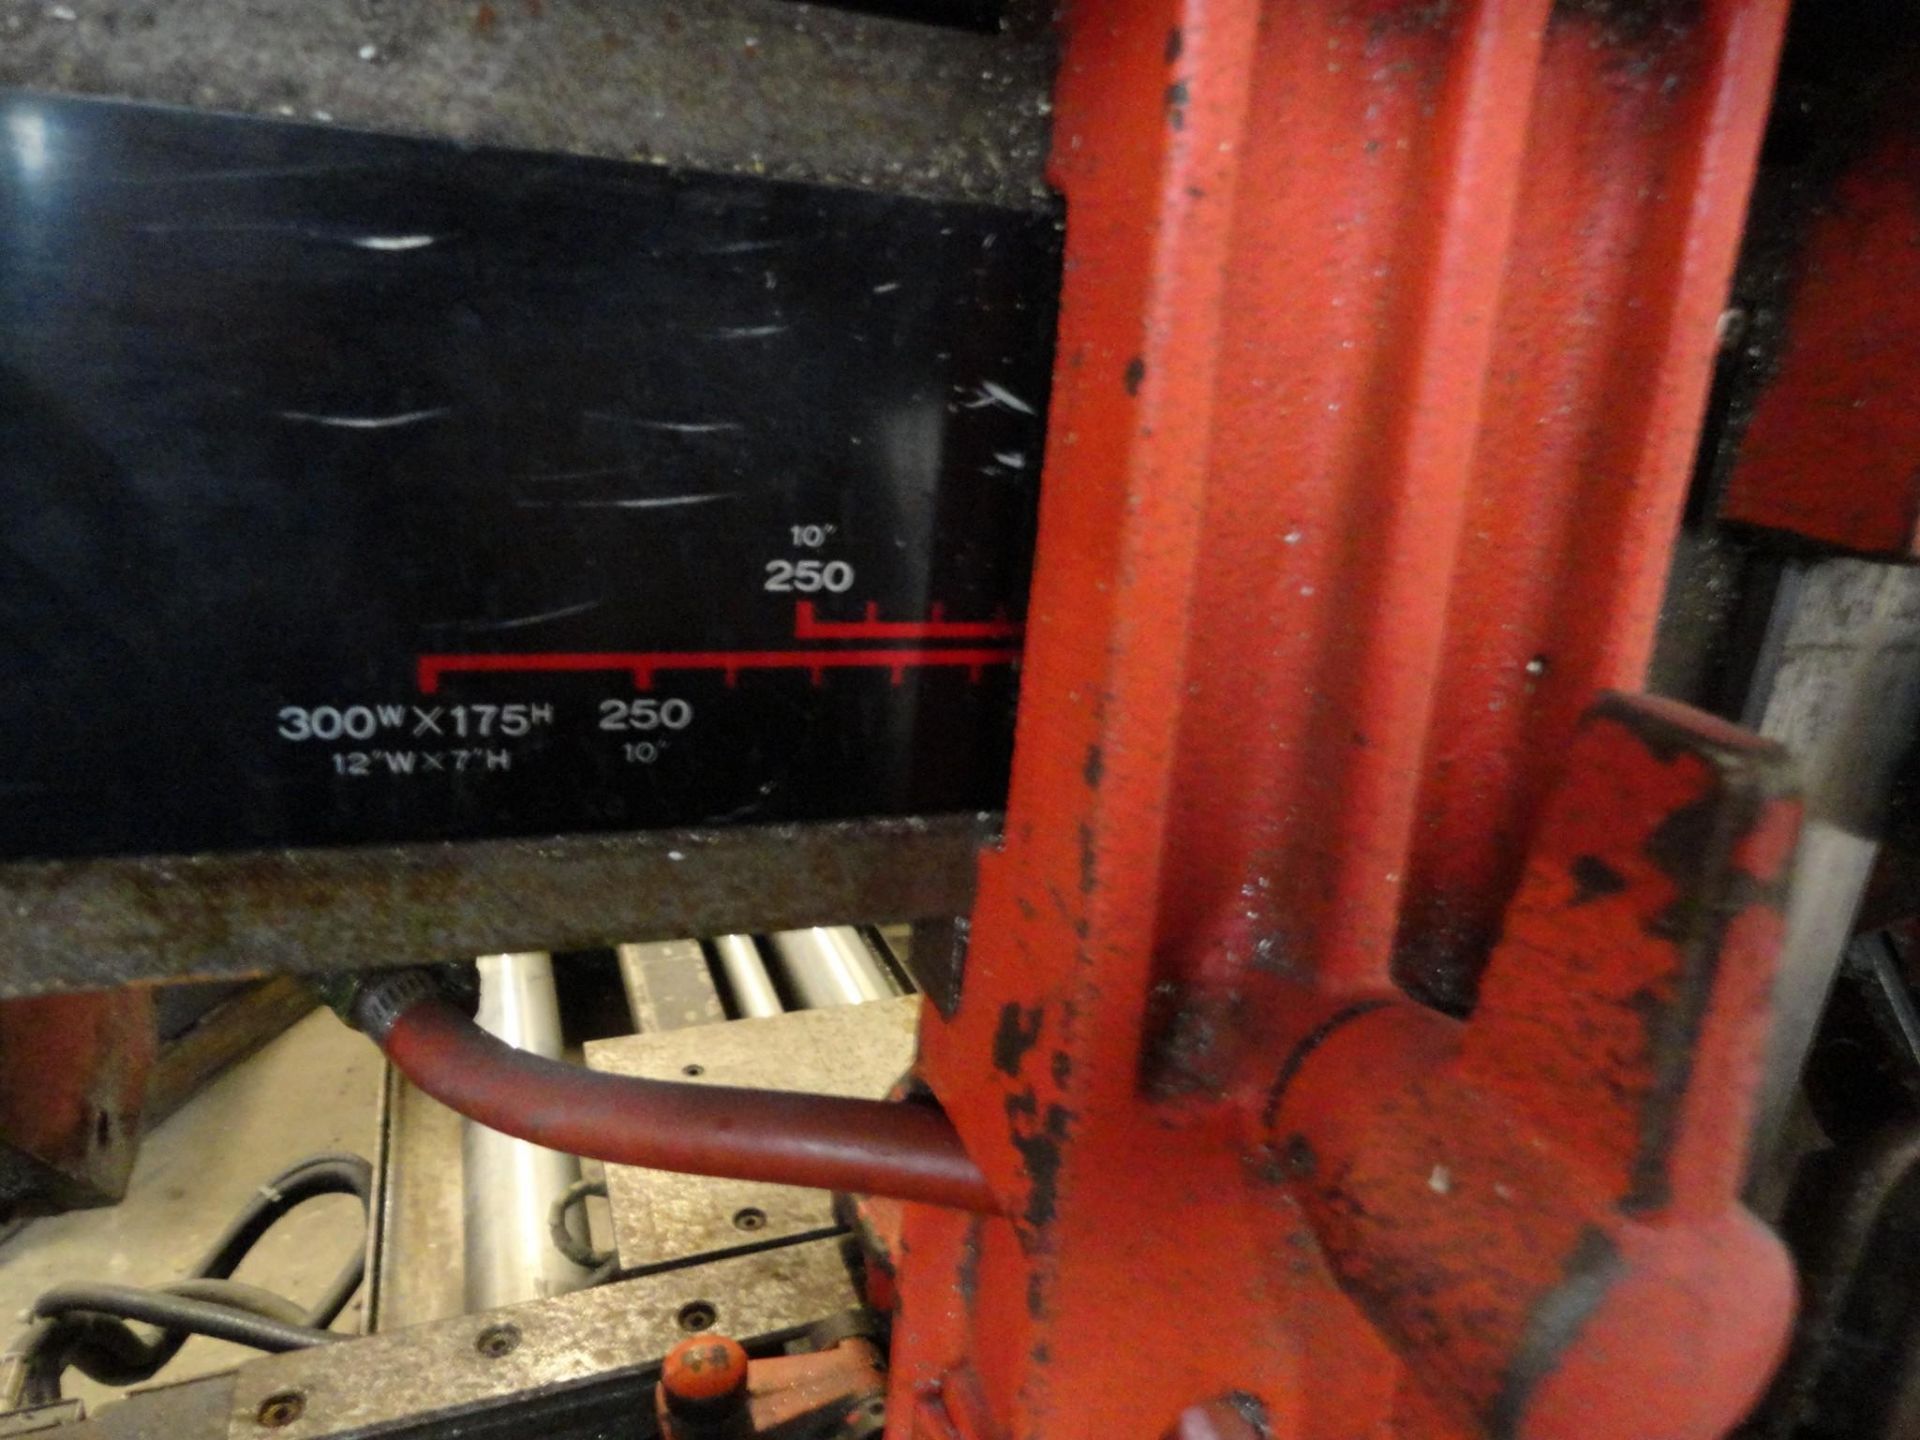 Amada HAD-250W Automatic Band Saw, Serial Number 250-20166 - Image 21 of 23